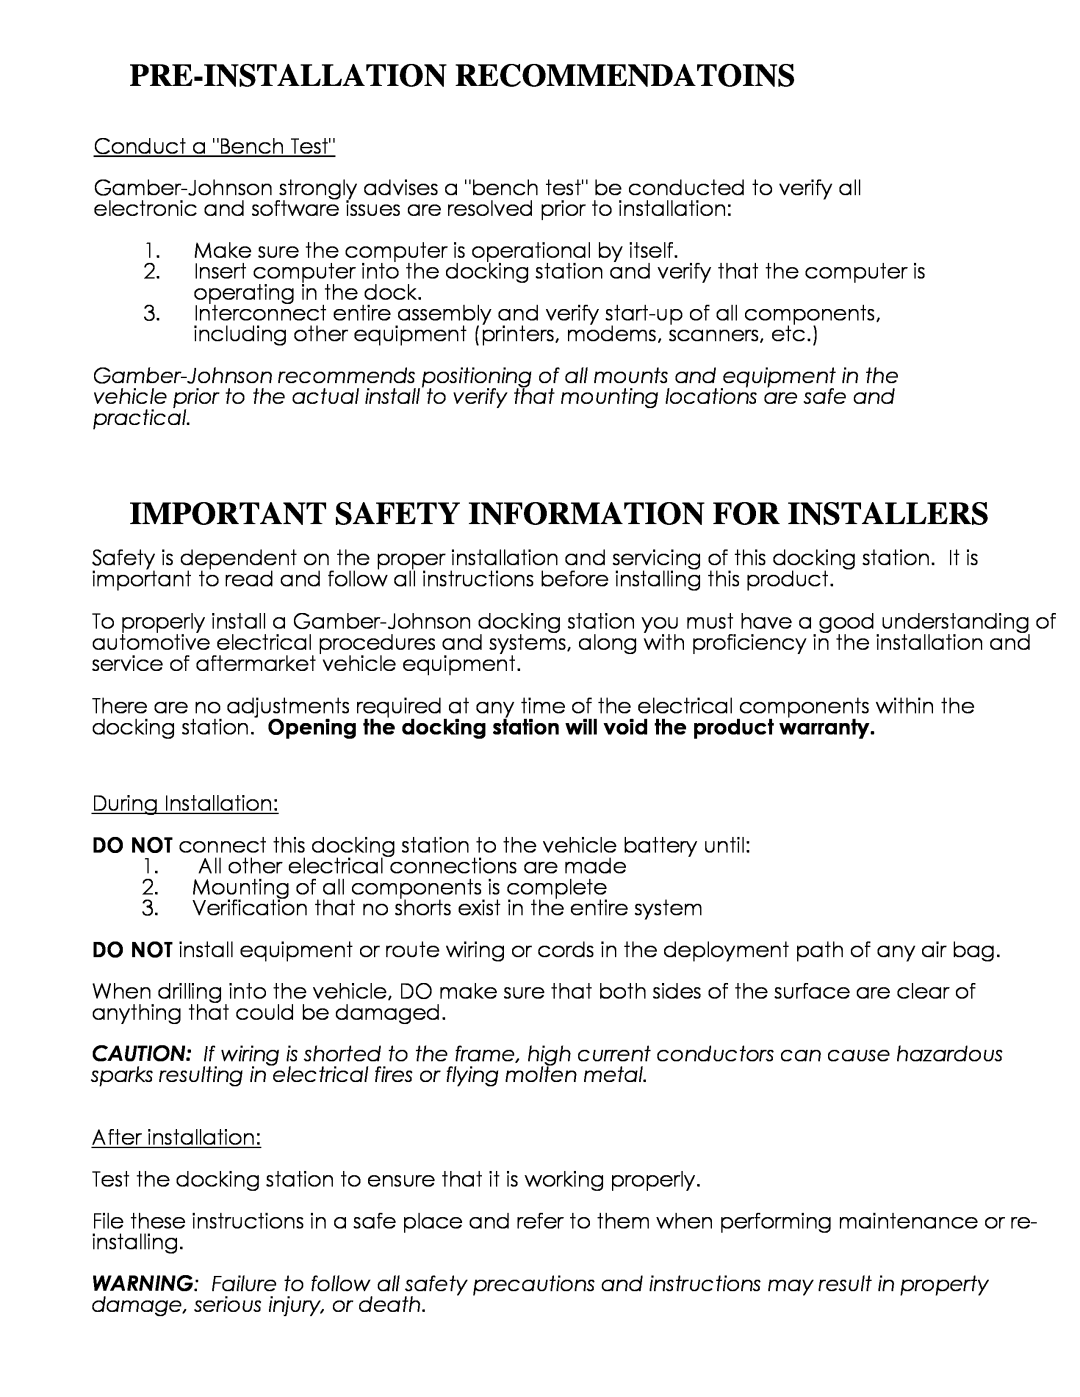 Gamber Johnson 7160-0393-00(-P) Pre-Installation Recommendatoins, Important Safety Information For Installers 